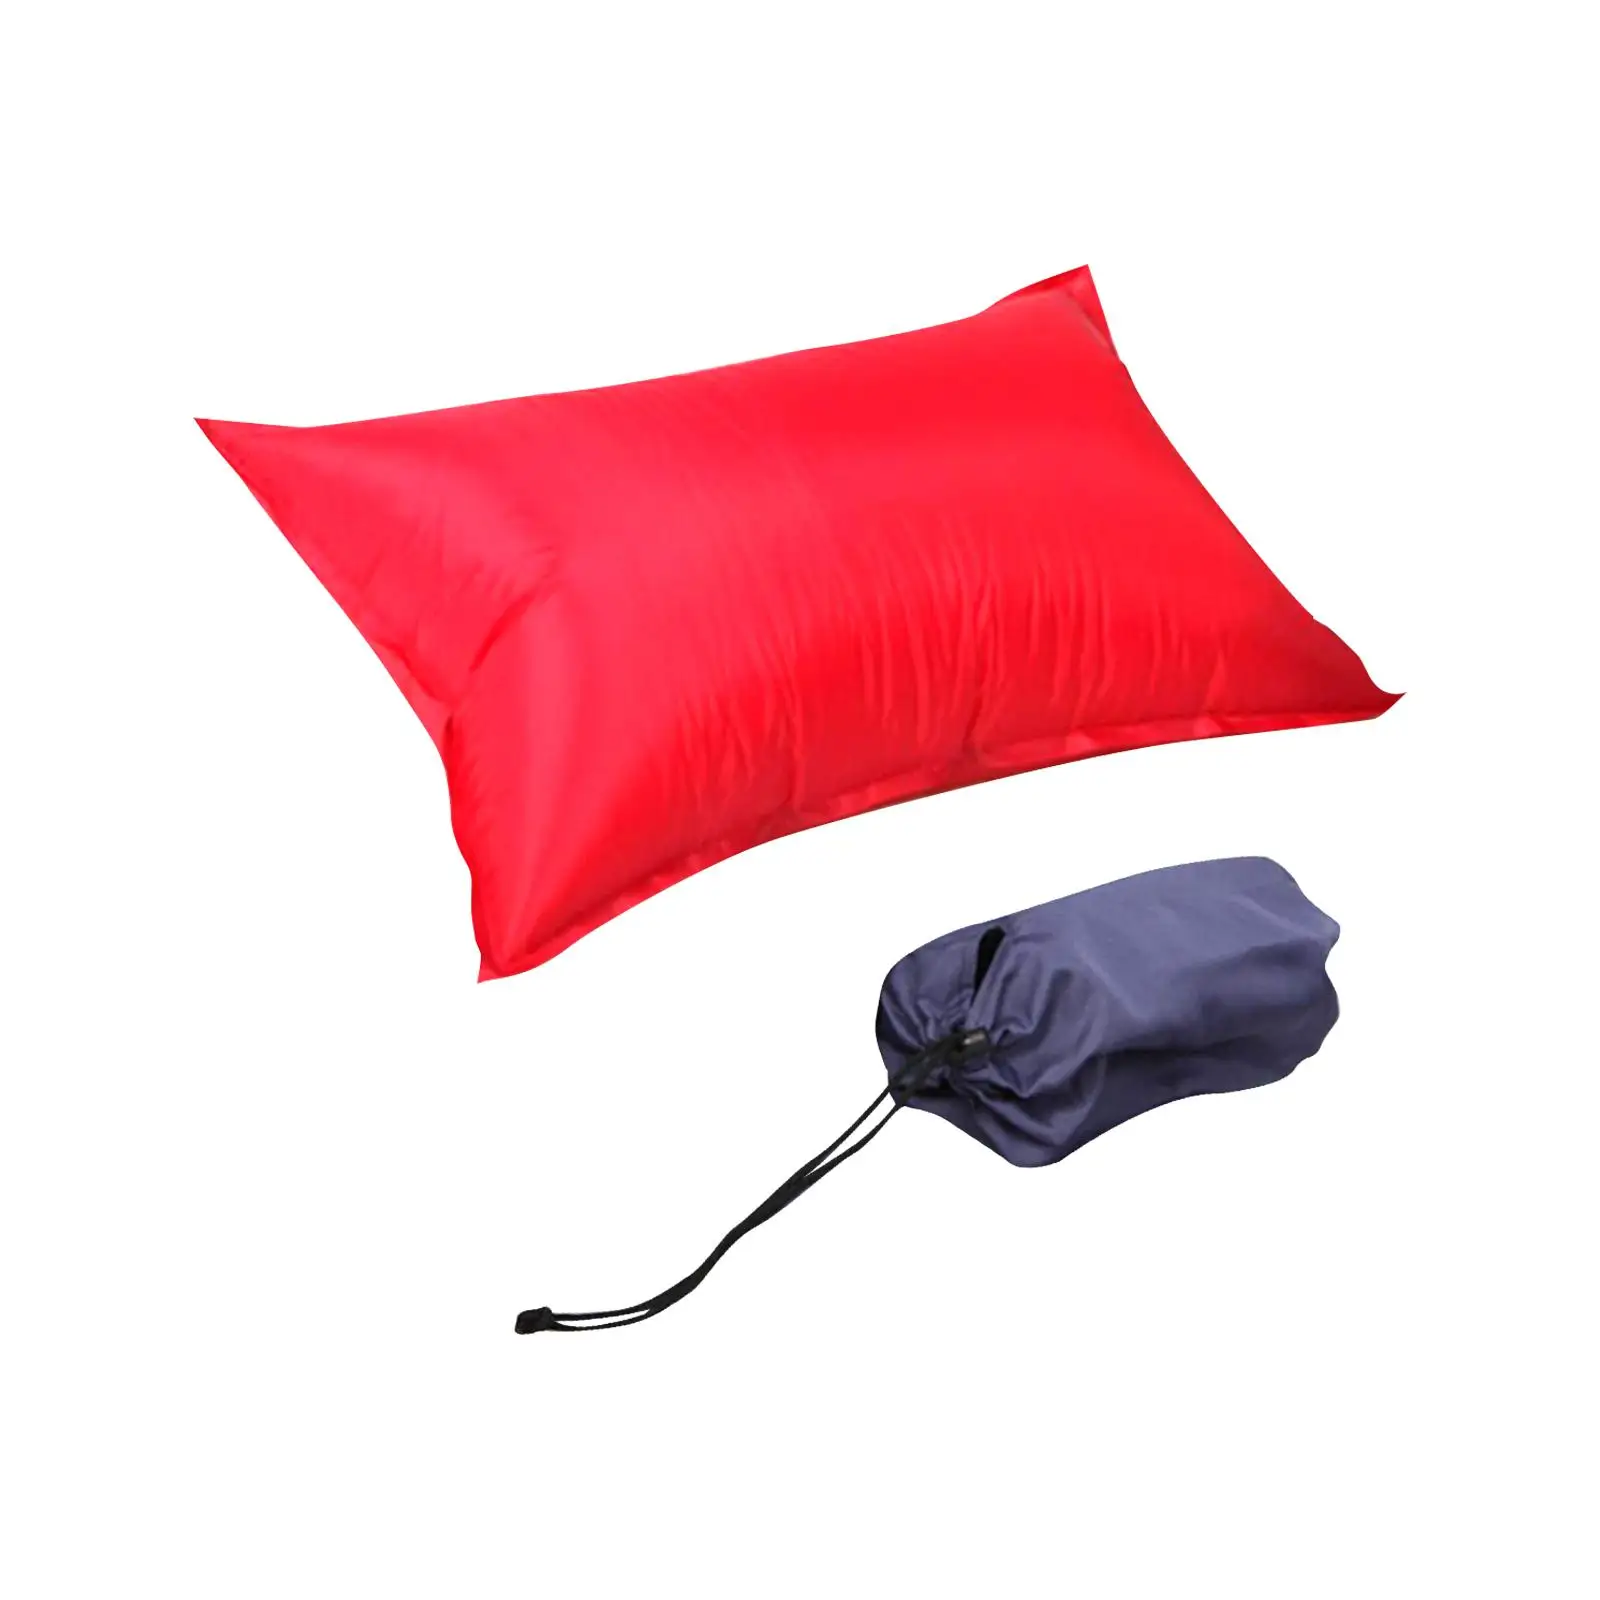 Inflatable Pillow, Lightweight Travel Pillow, Self Inflating Pillow for Car Airplane Outdoor